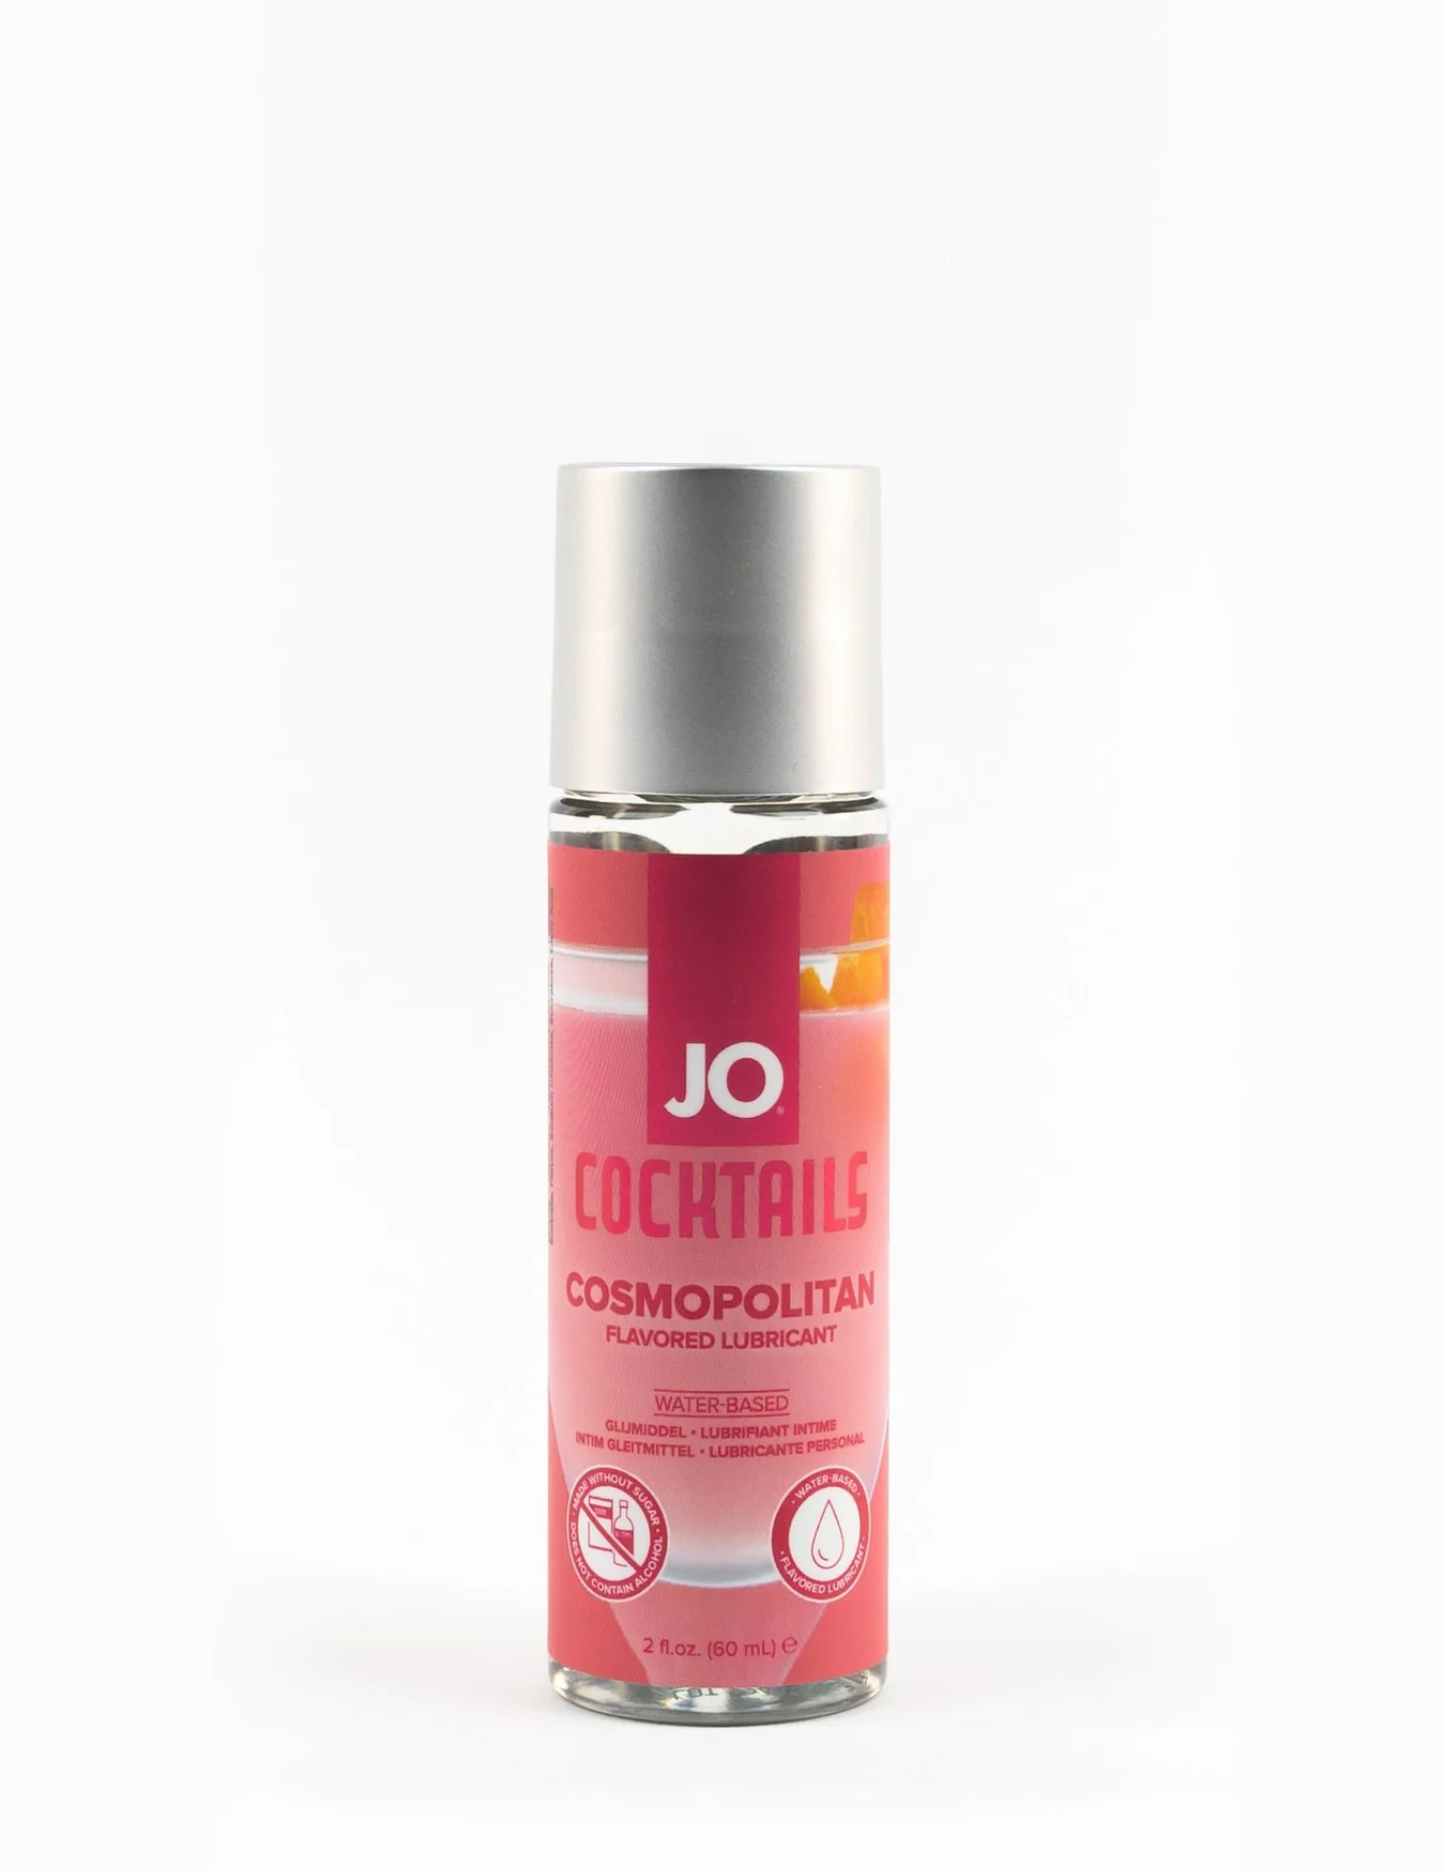 Photo of the 2oz Cosmopolitan bottle of System JO Cocktails Flavored Lubricant. 